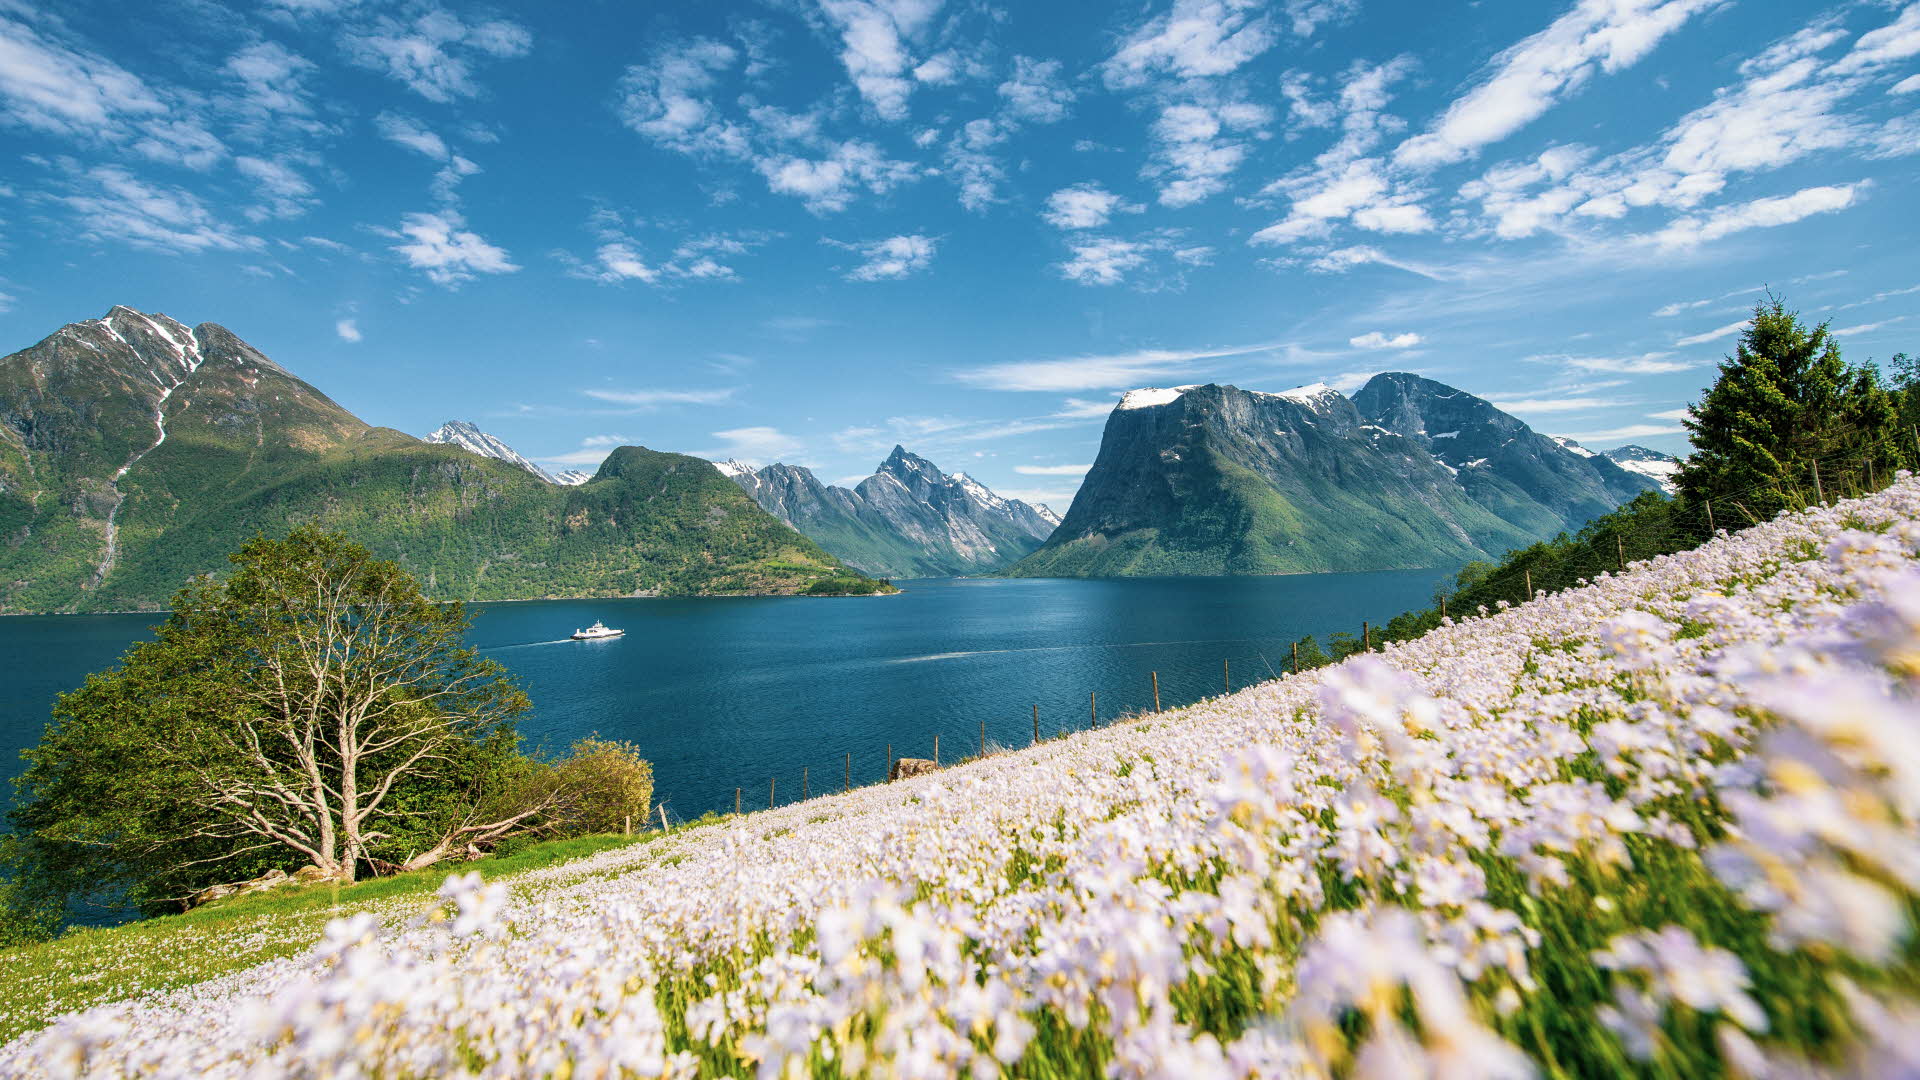 Field of purple flowers in front of the Hjørundfjord. Rugged peaks in the background and a boat sailing.